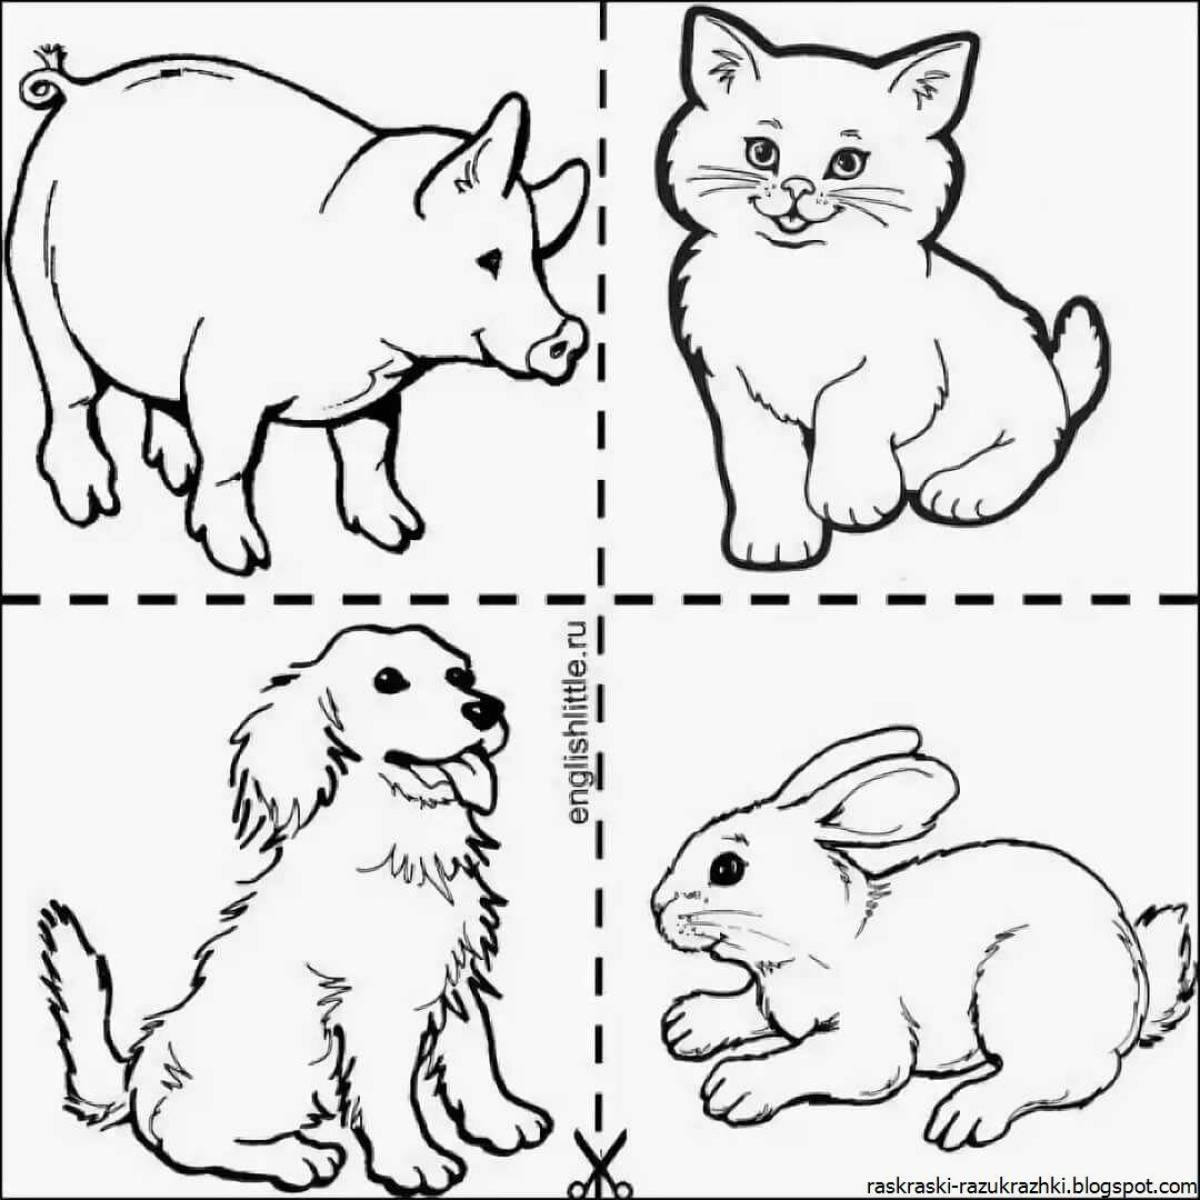 Adorable pet coloring pages for 3-4 year olds